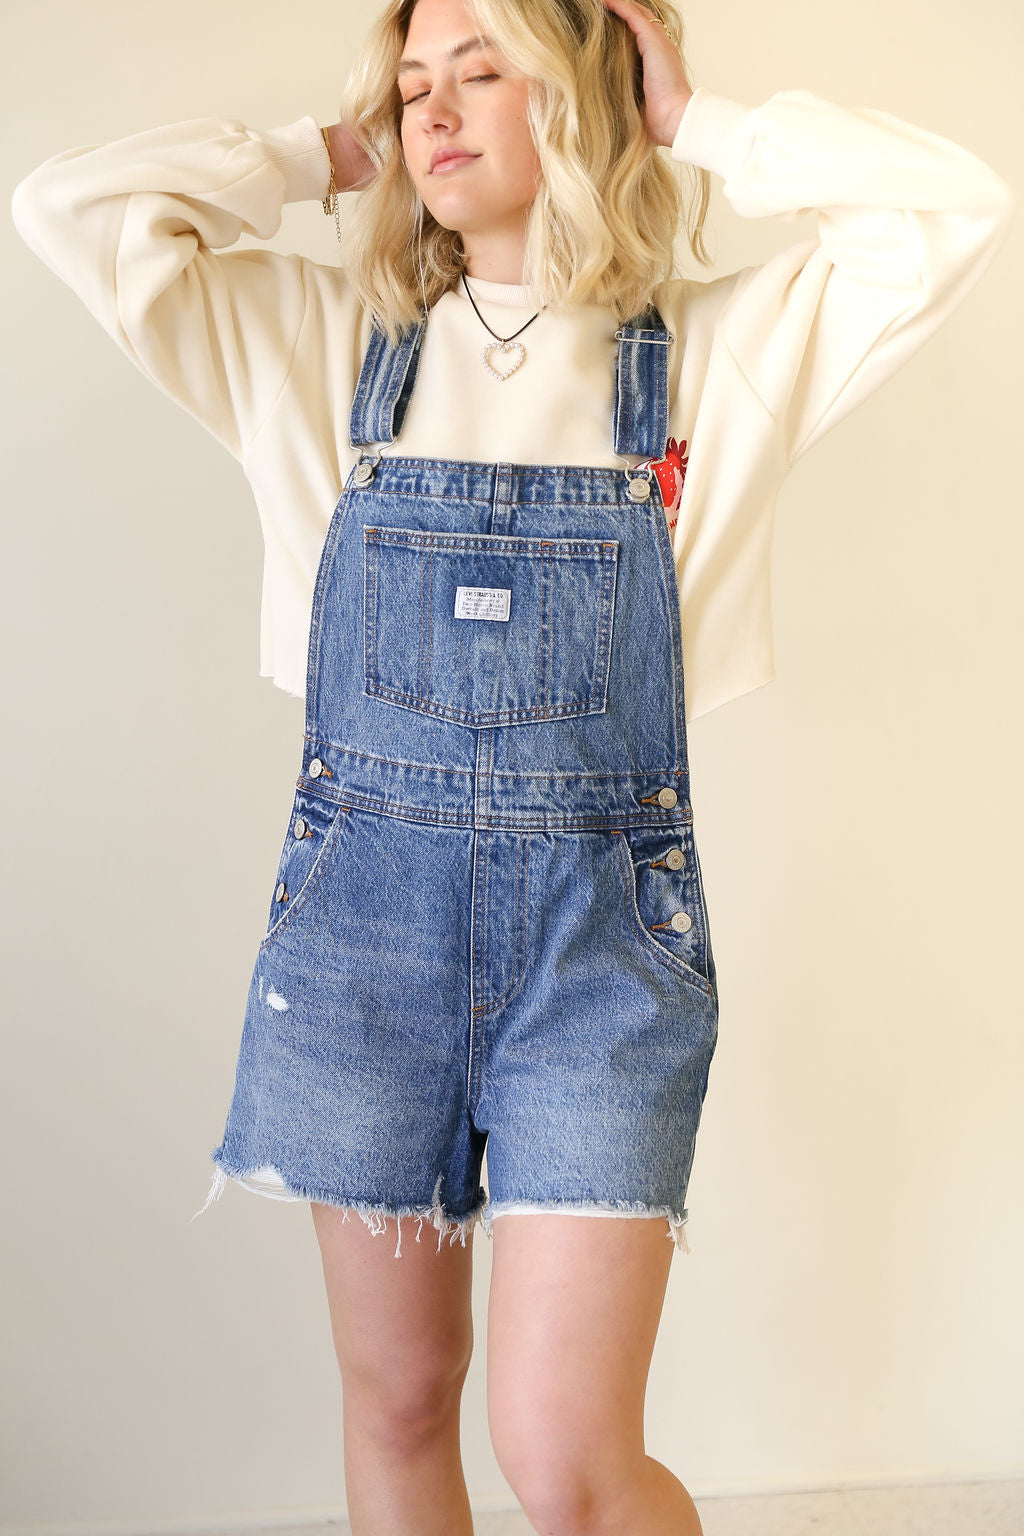 Vintage Meadow Games Shortalls by Levi's